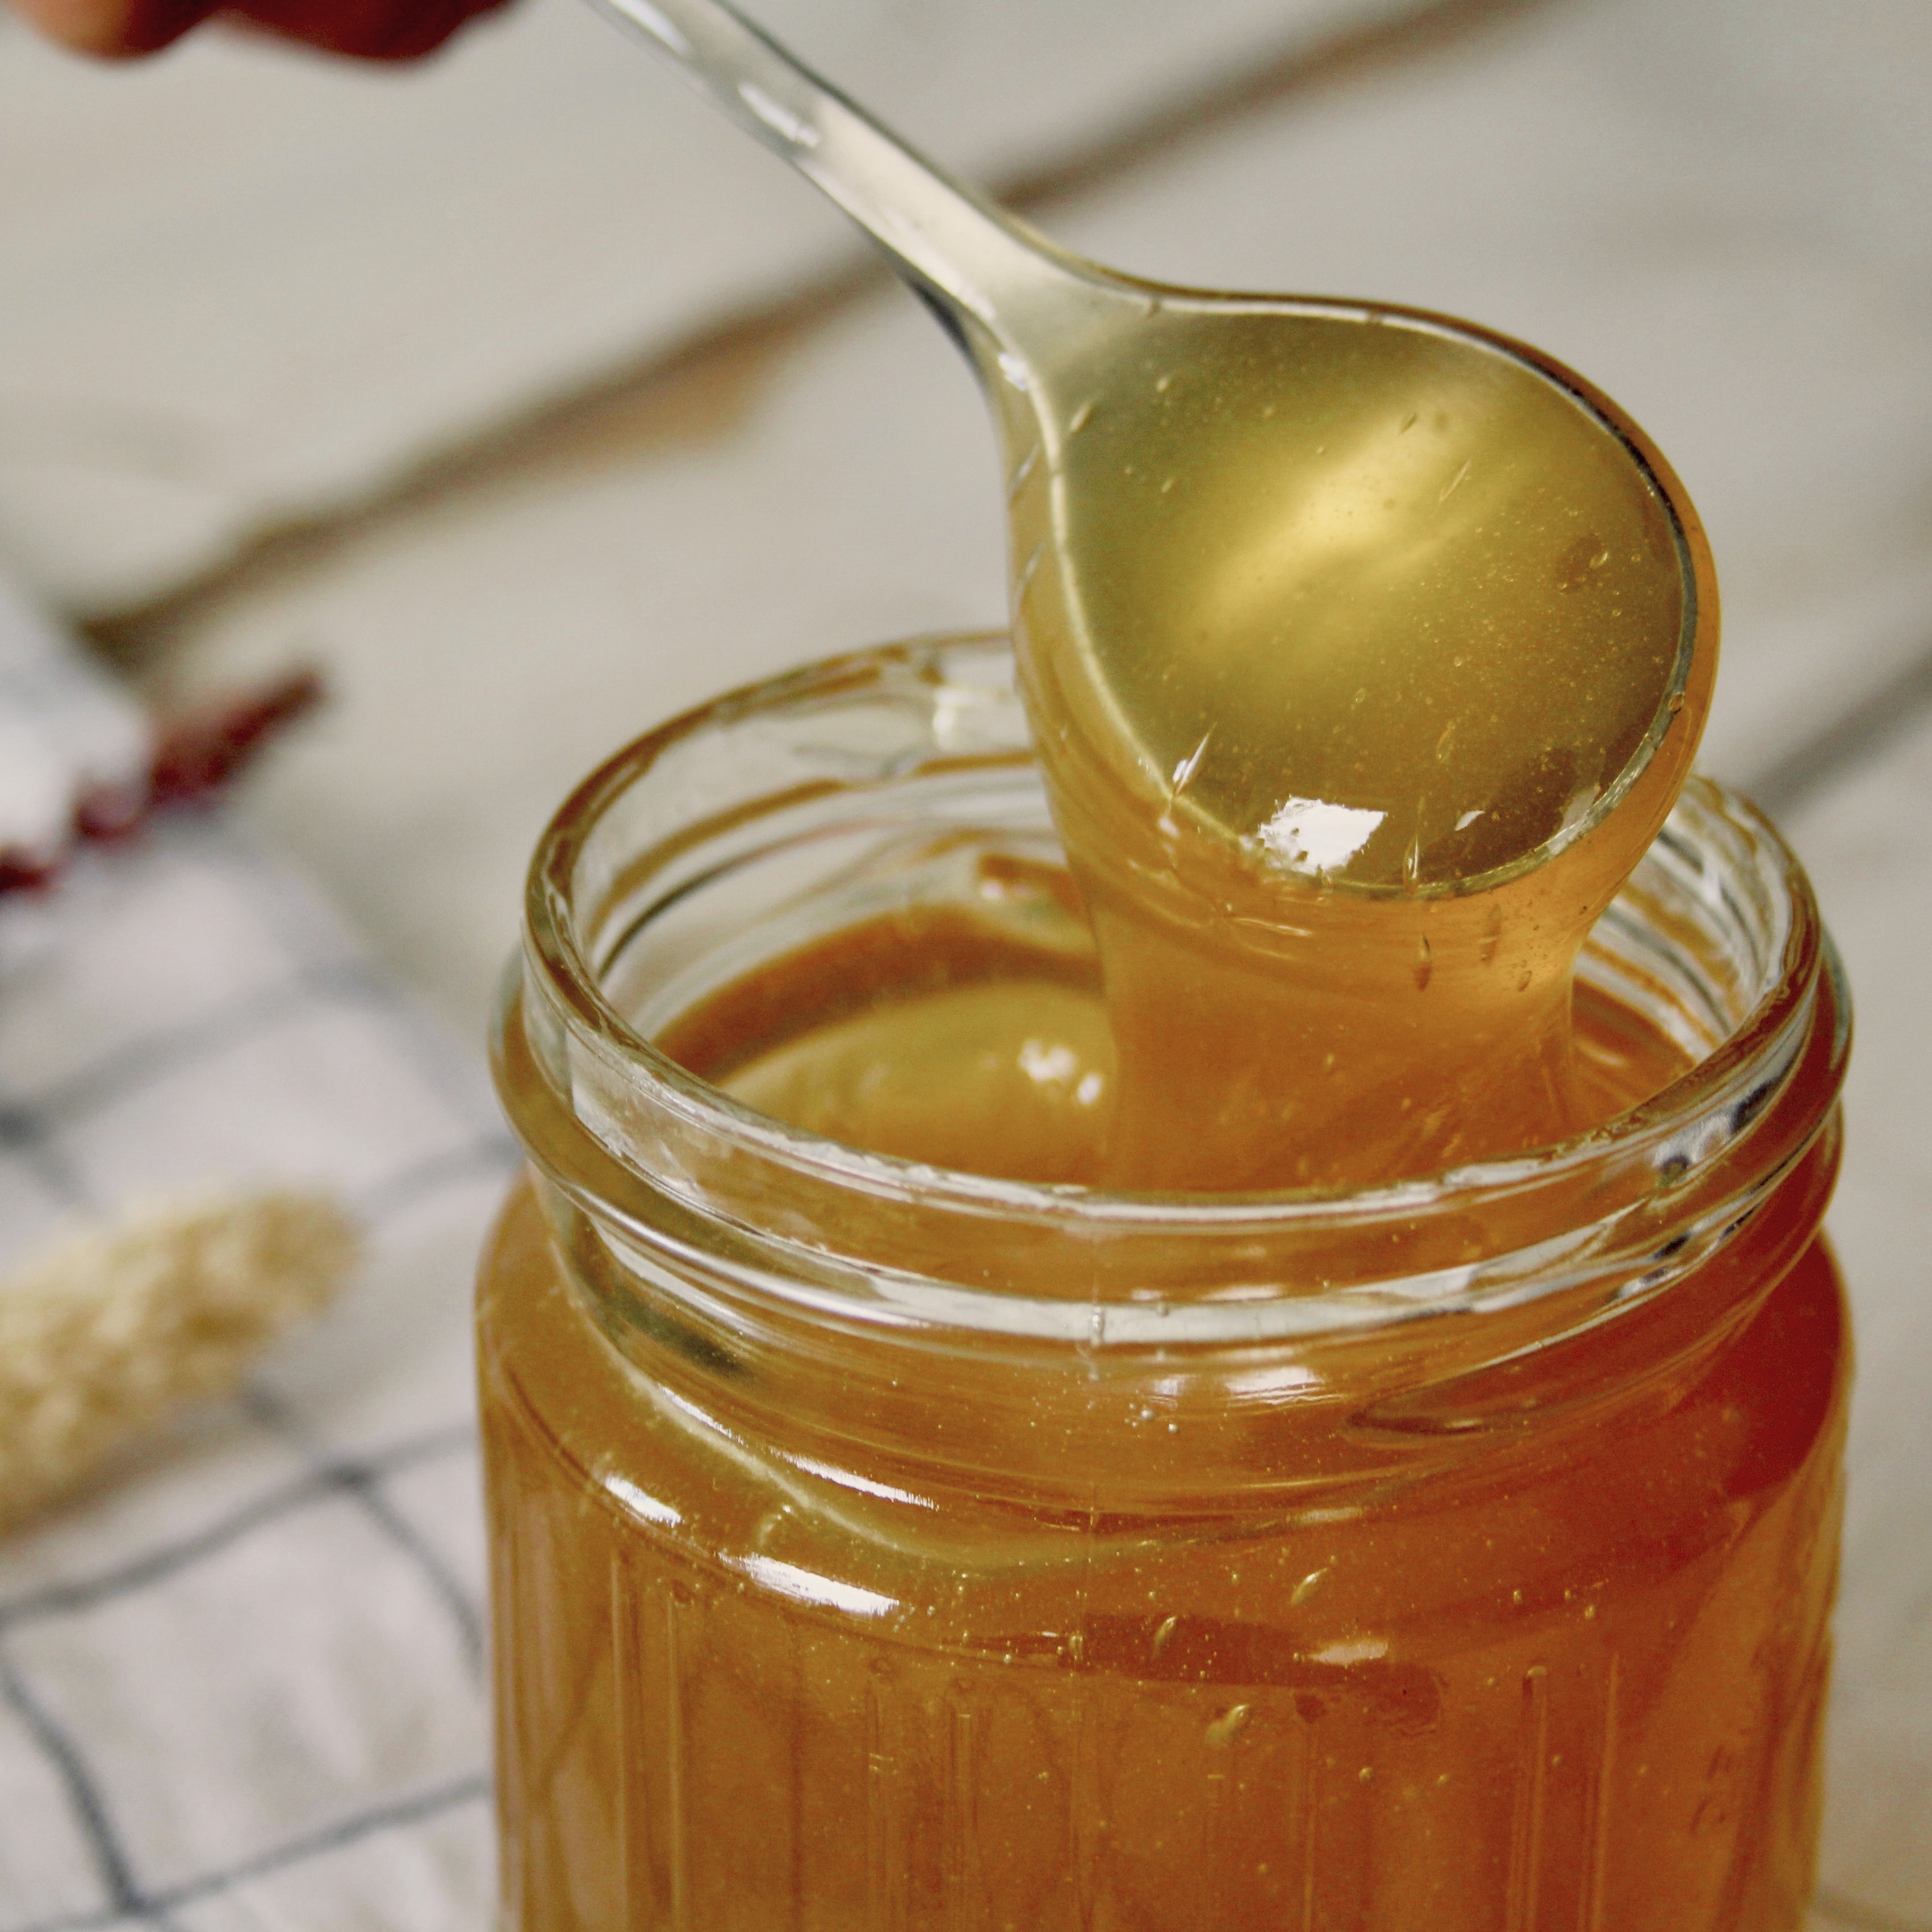 A spoon dipping into a glass jar of pure honey.